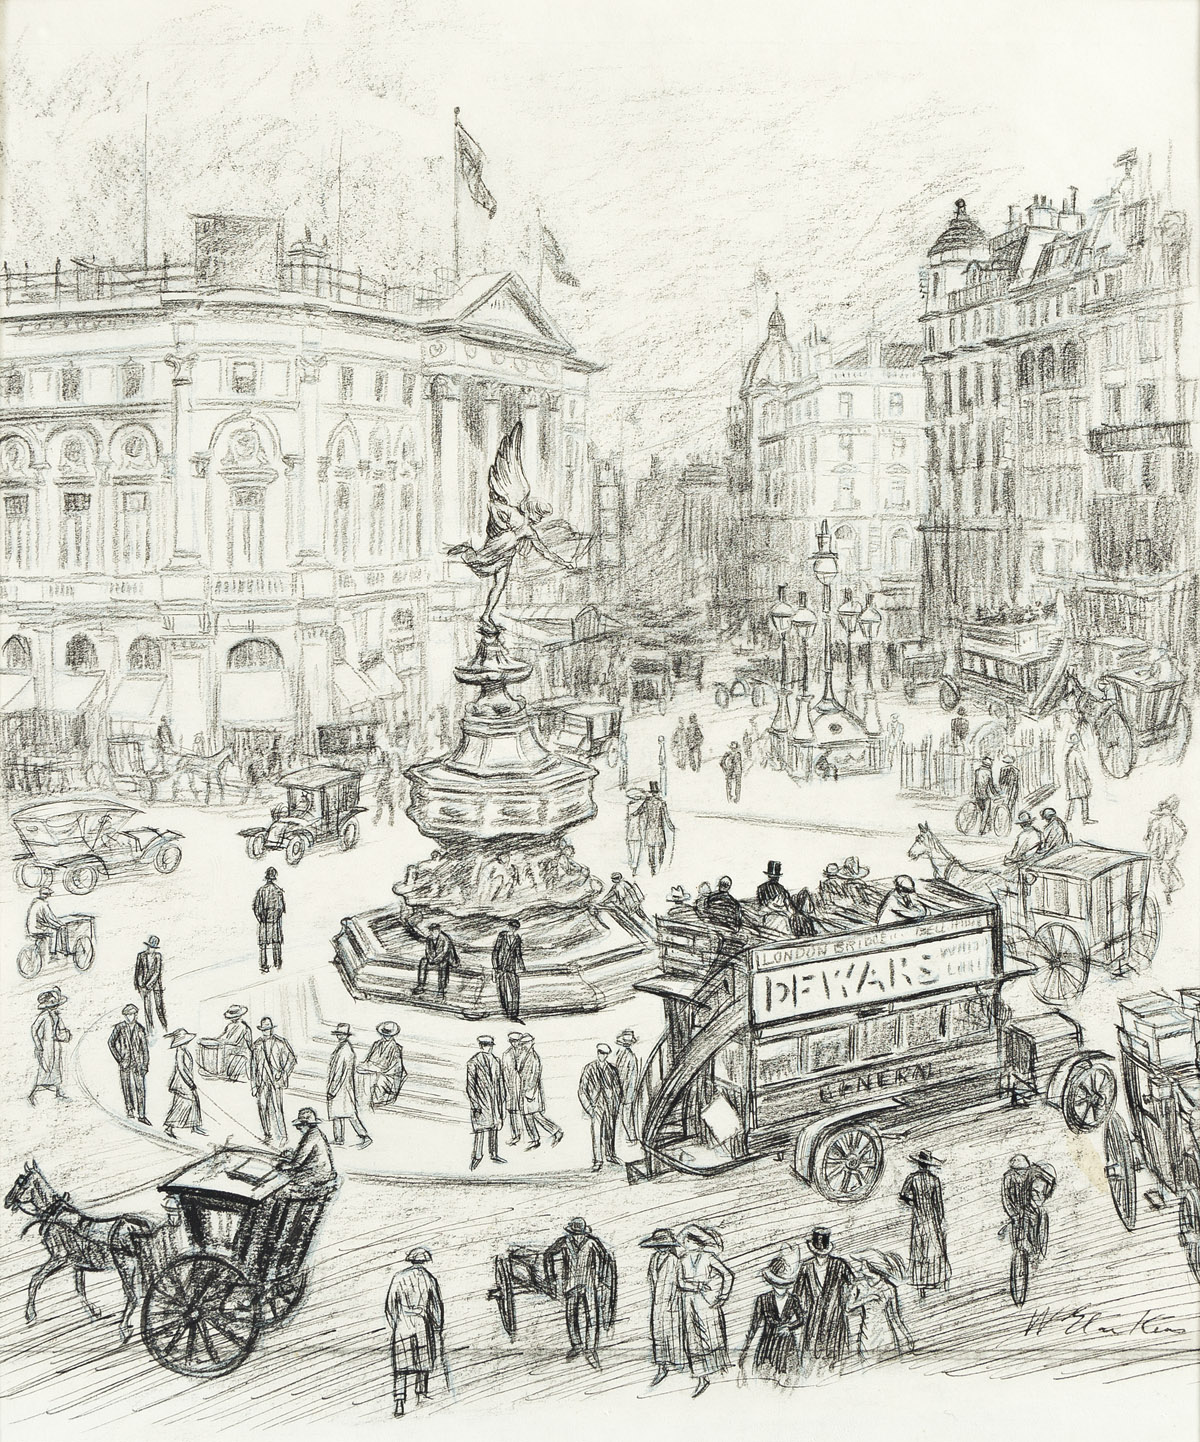 WILLIAM GLACKENS (1870-1938) “Piccadilly Circus.”